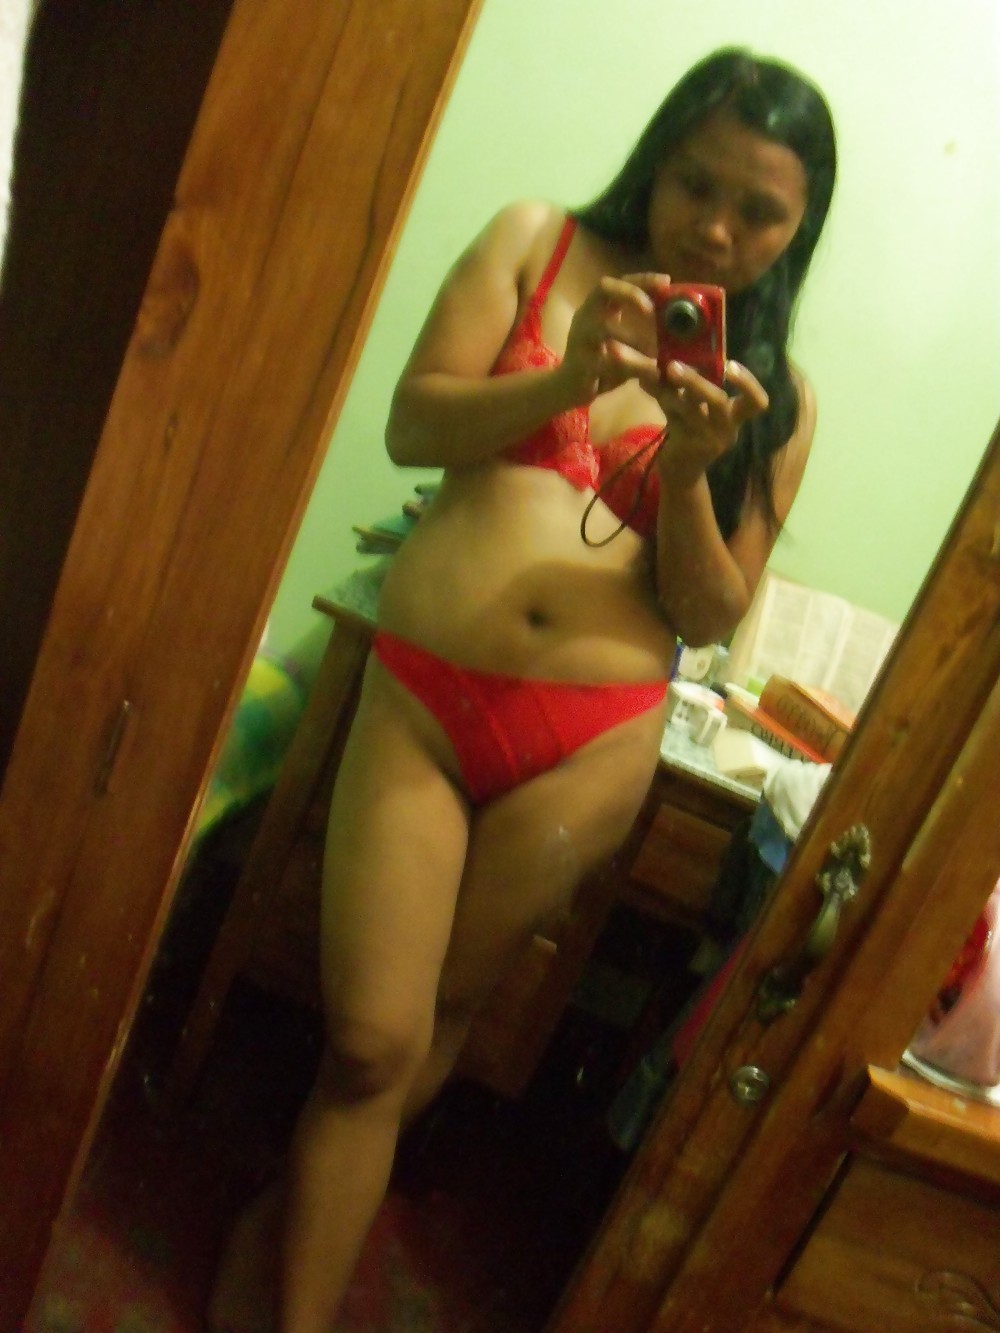 Her name is Ivy she is Filipino met her online  #24790932